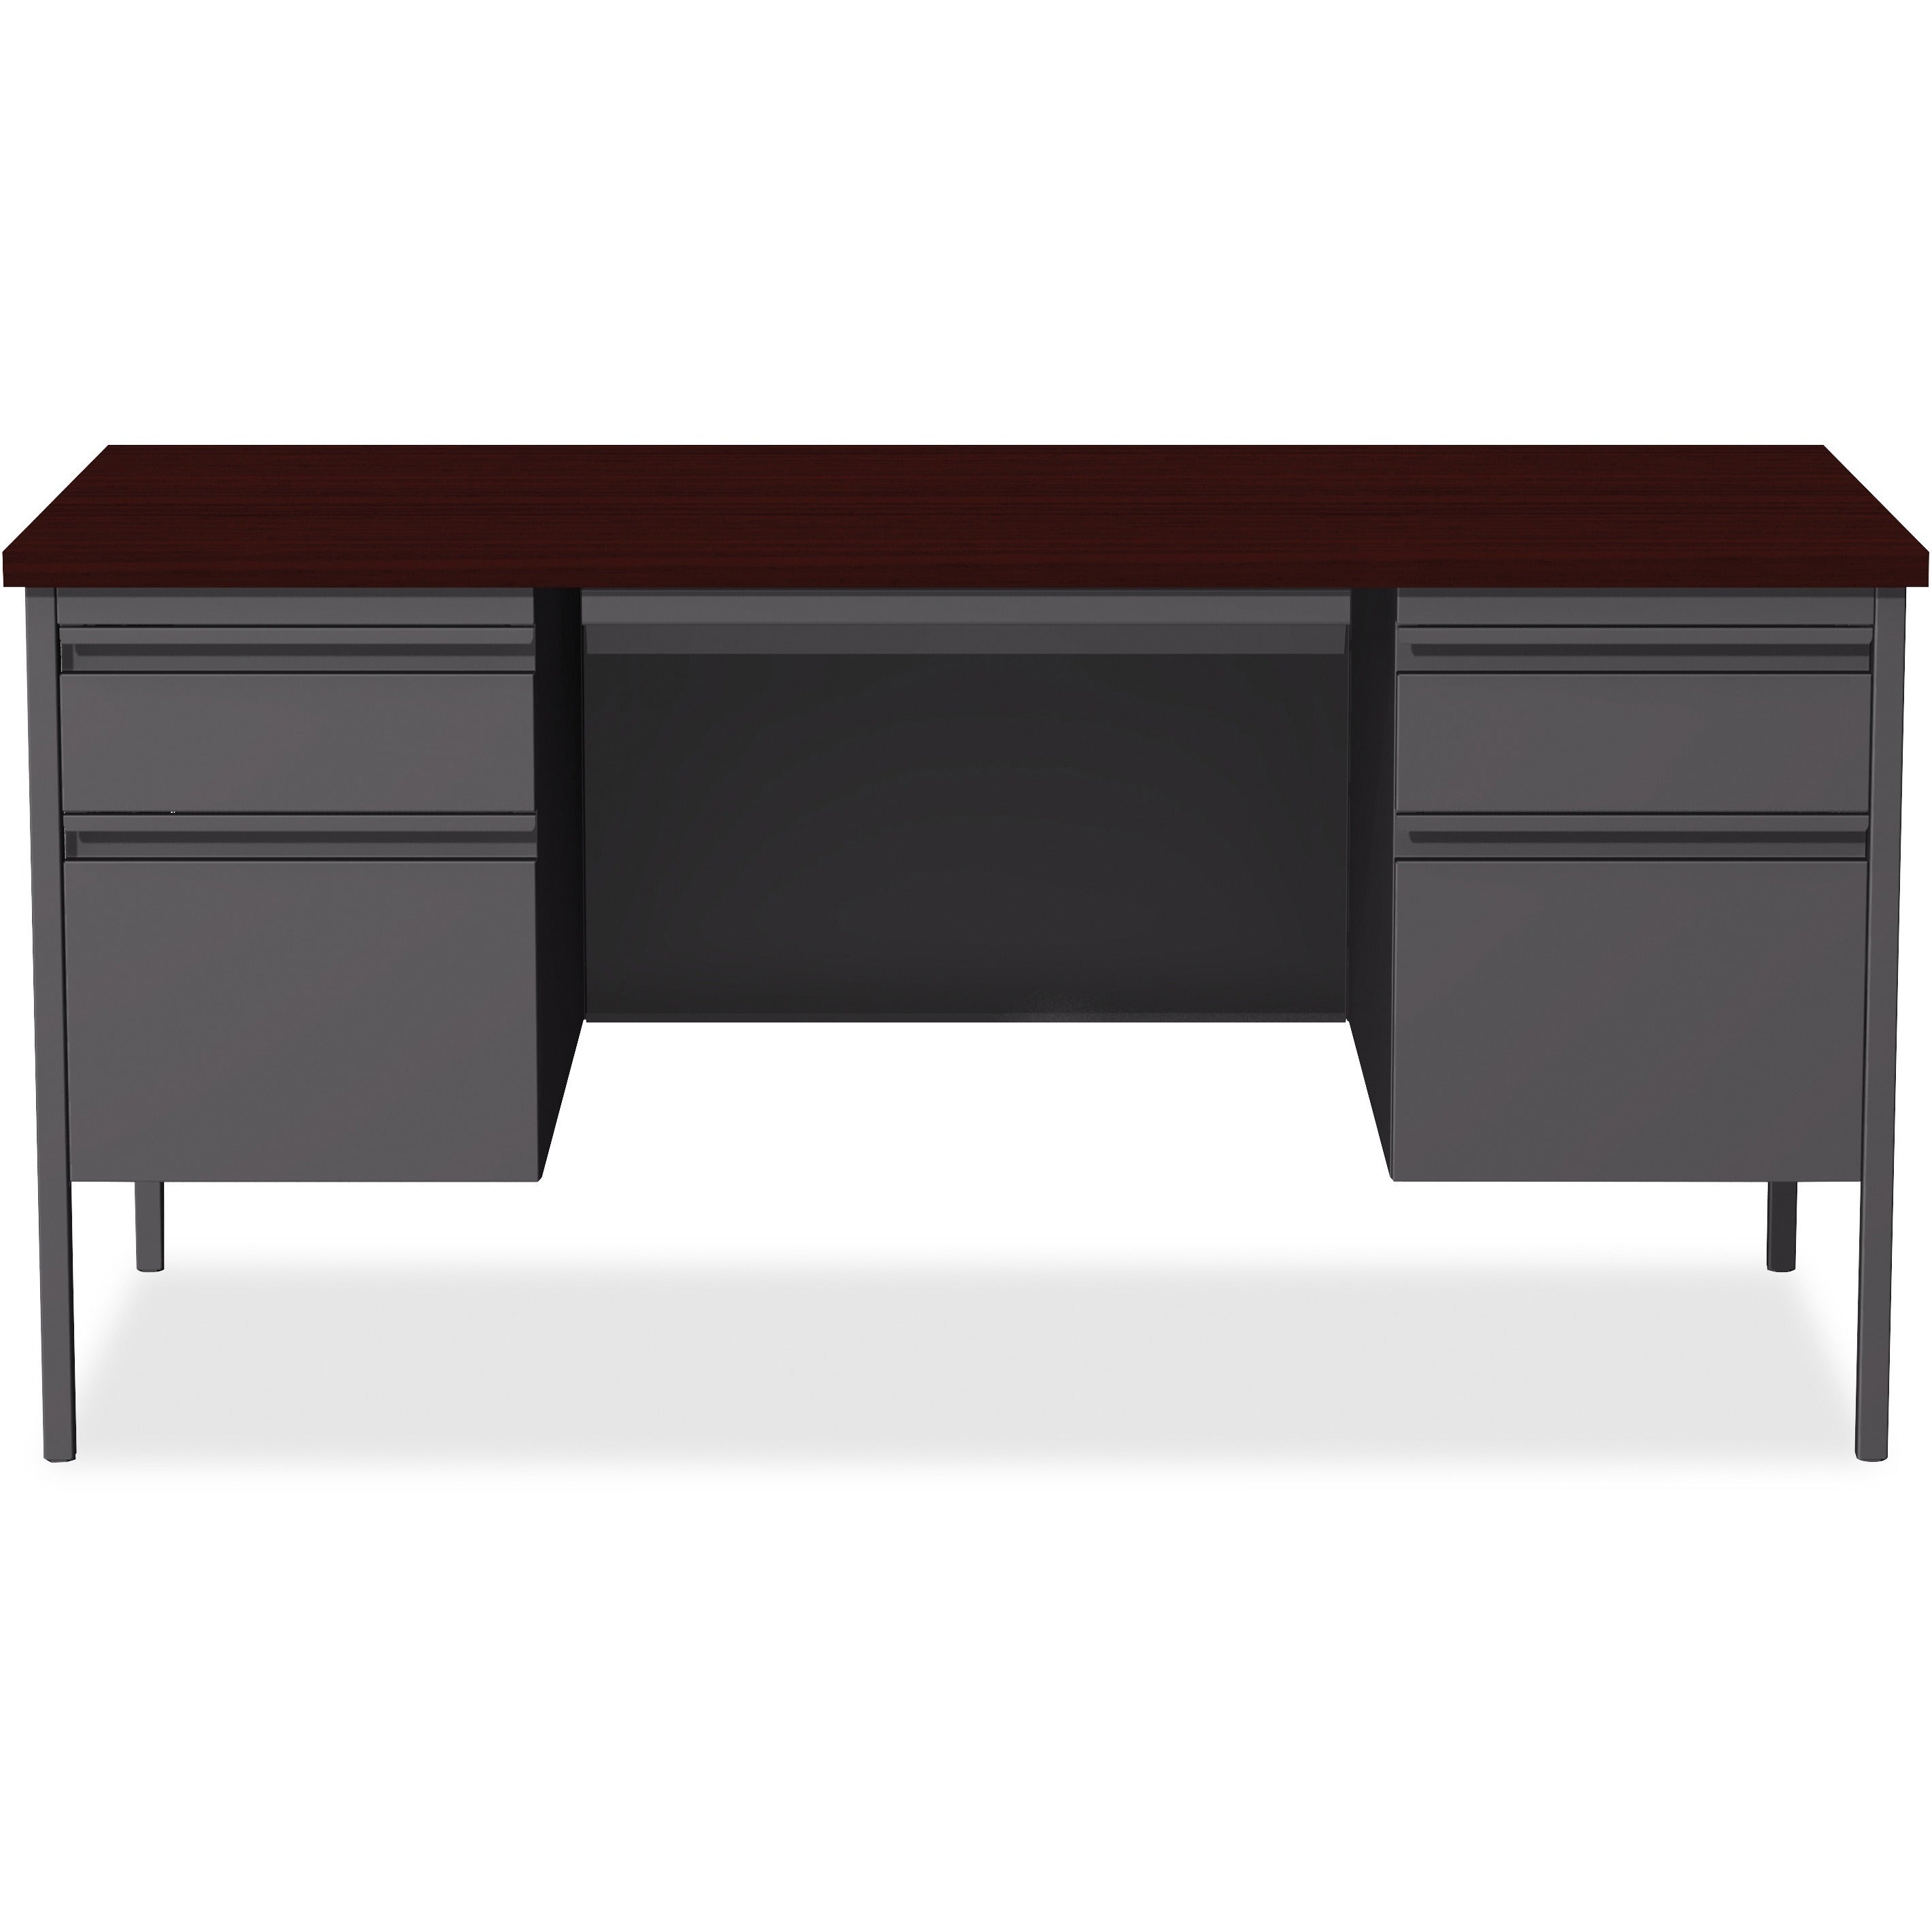 lorell-fortress-series-double-pedestal-desk-for-table-toprectangle-top-x-60-table-top-width-x-30-table-top-depth-x-112-table-top-thickness-2950-height-assembly-required-laminated-mahogany-steel-1-each_llr60928 - 2